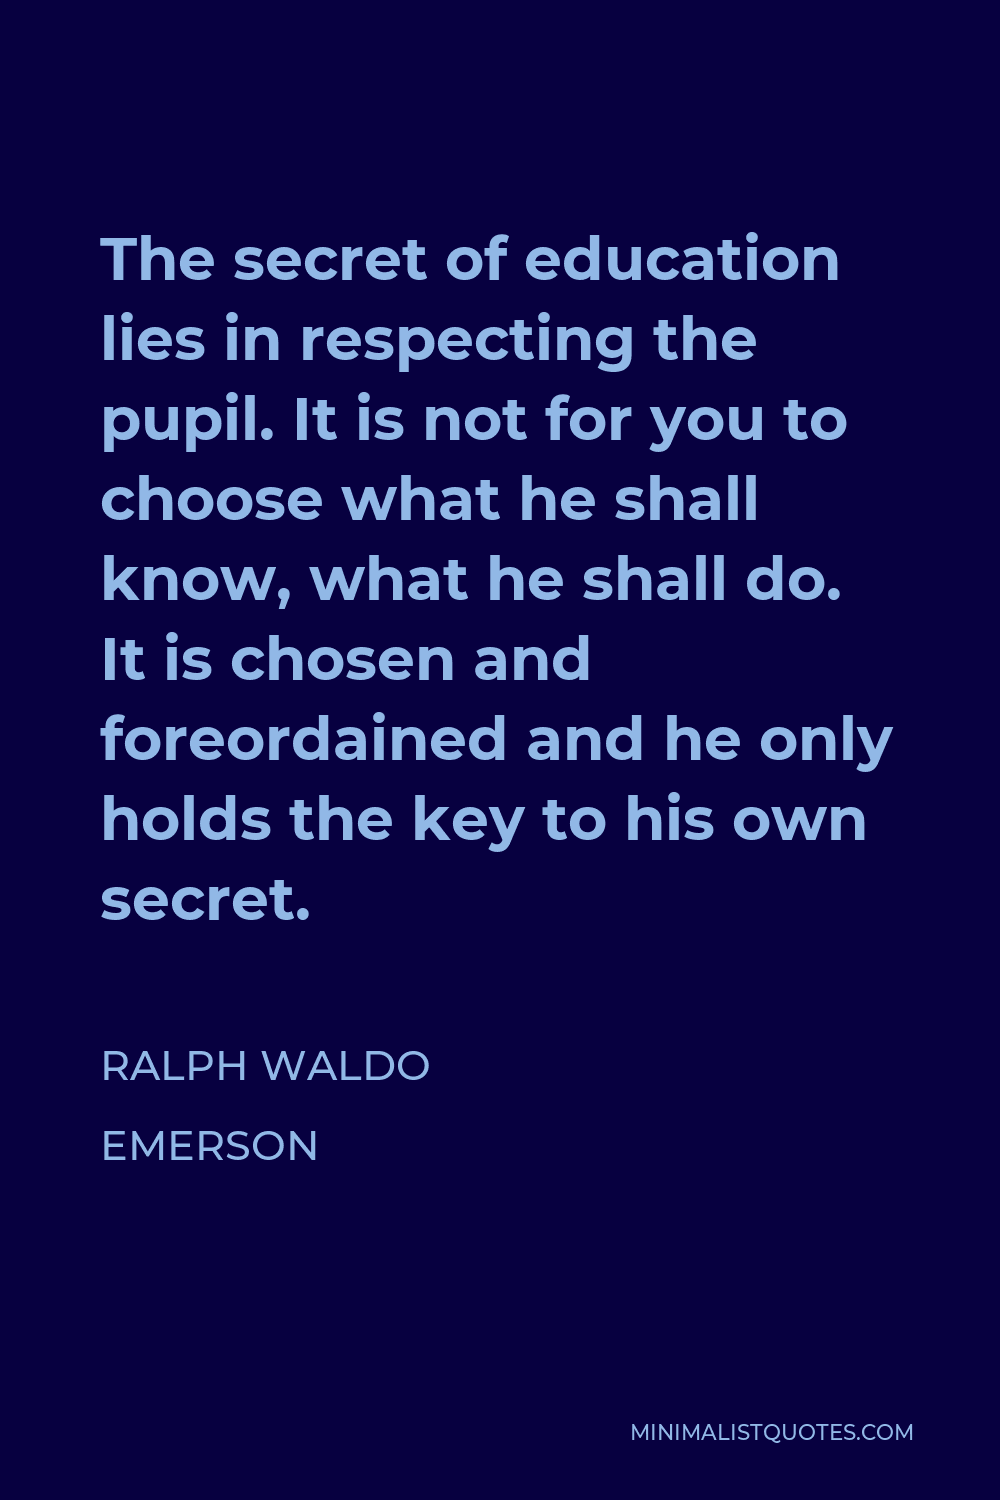 Ralph Waldo Emerson Quote - The secret of education lies in respecting the pupil. It is not for you to choose what he shall know, what he shall do. It is chosen and foreordained and he only holds the key to his own secret.